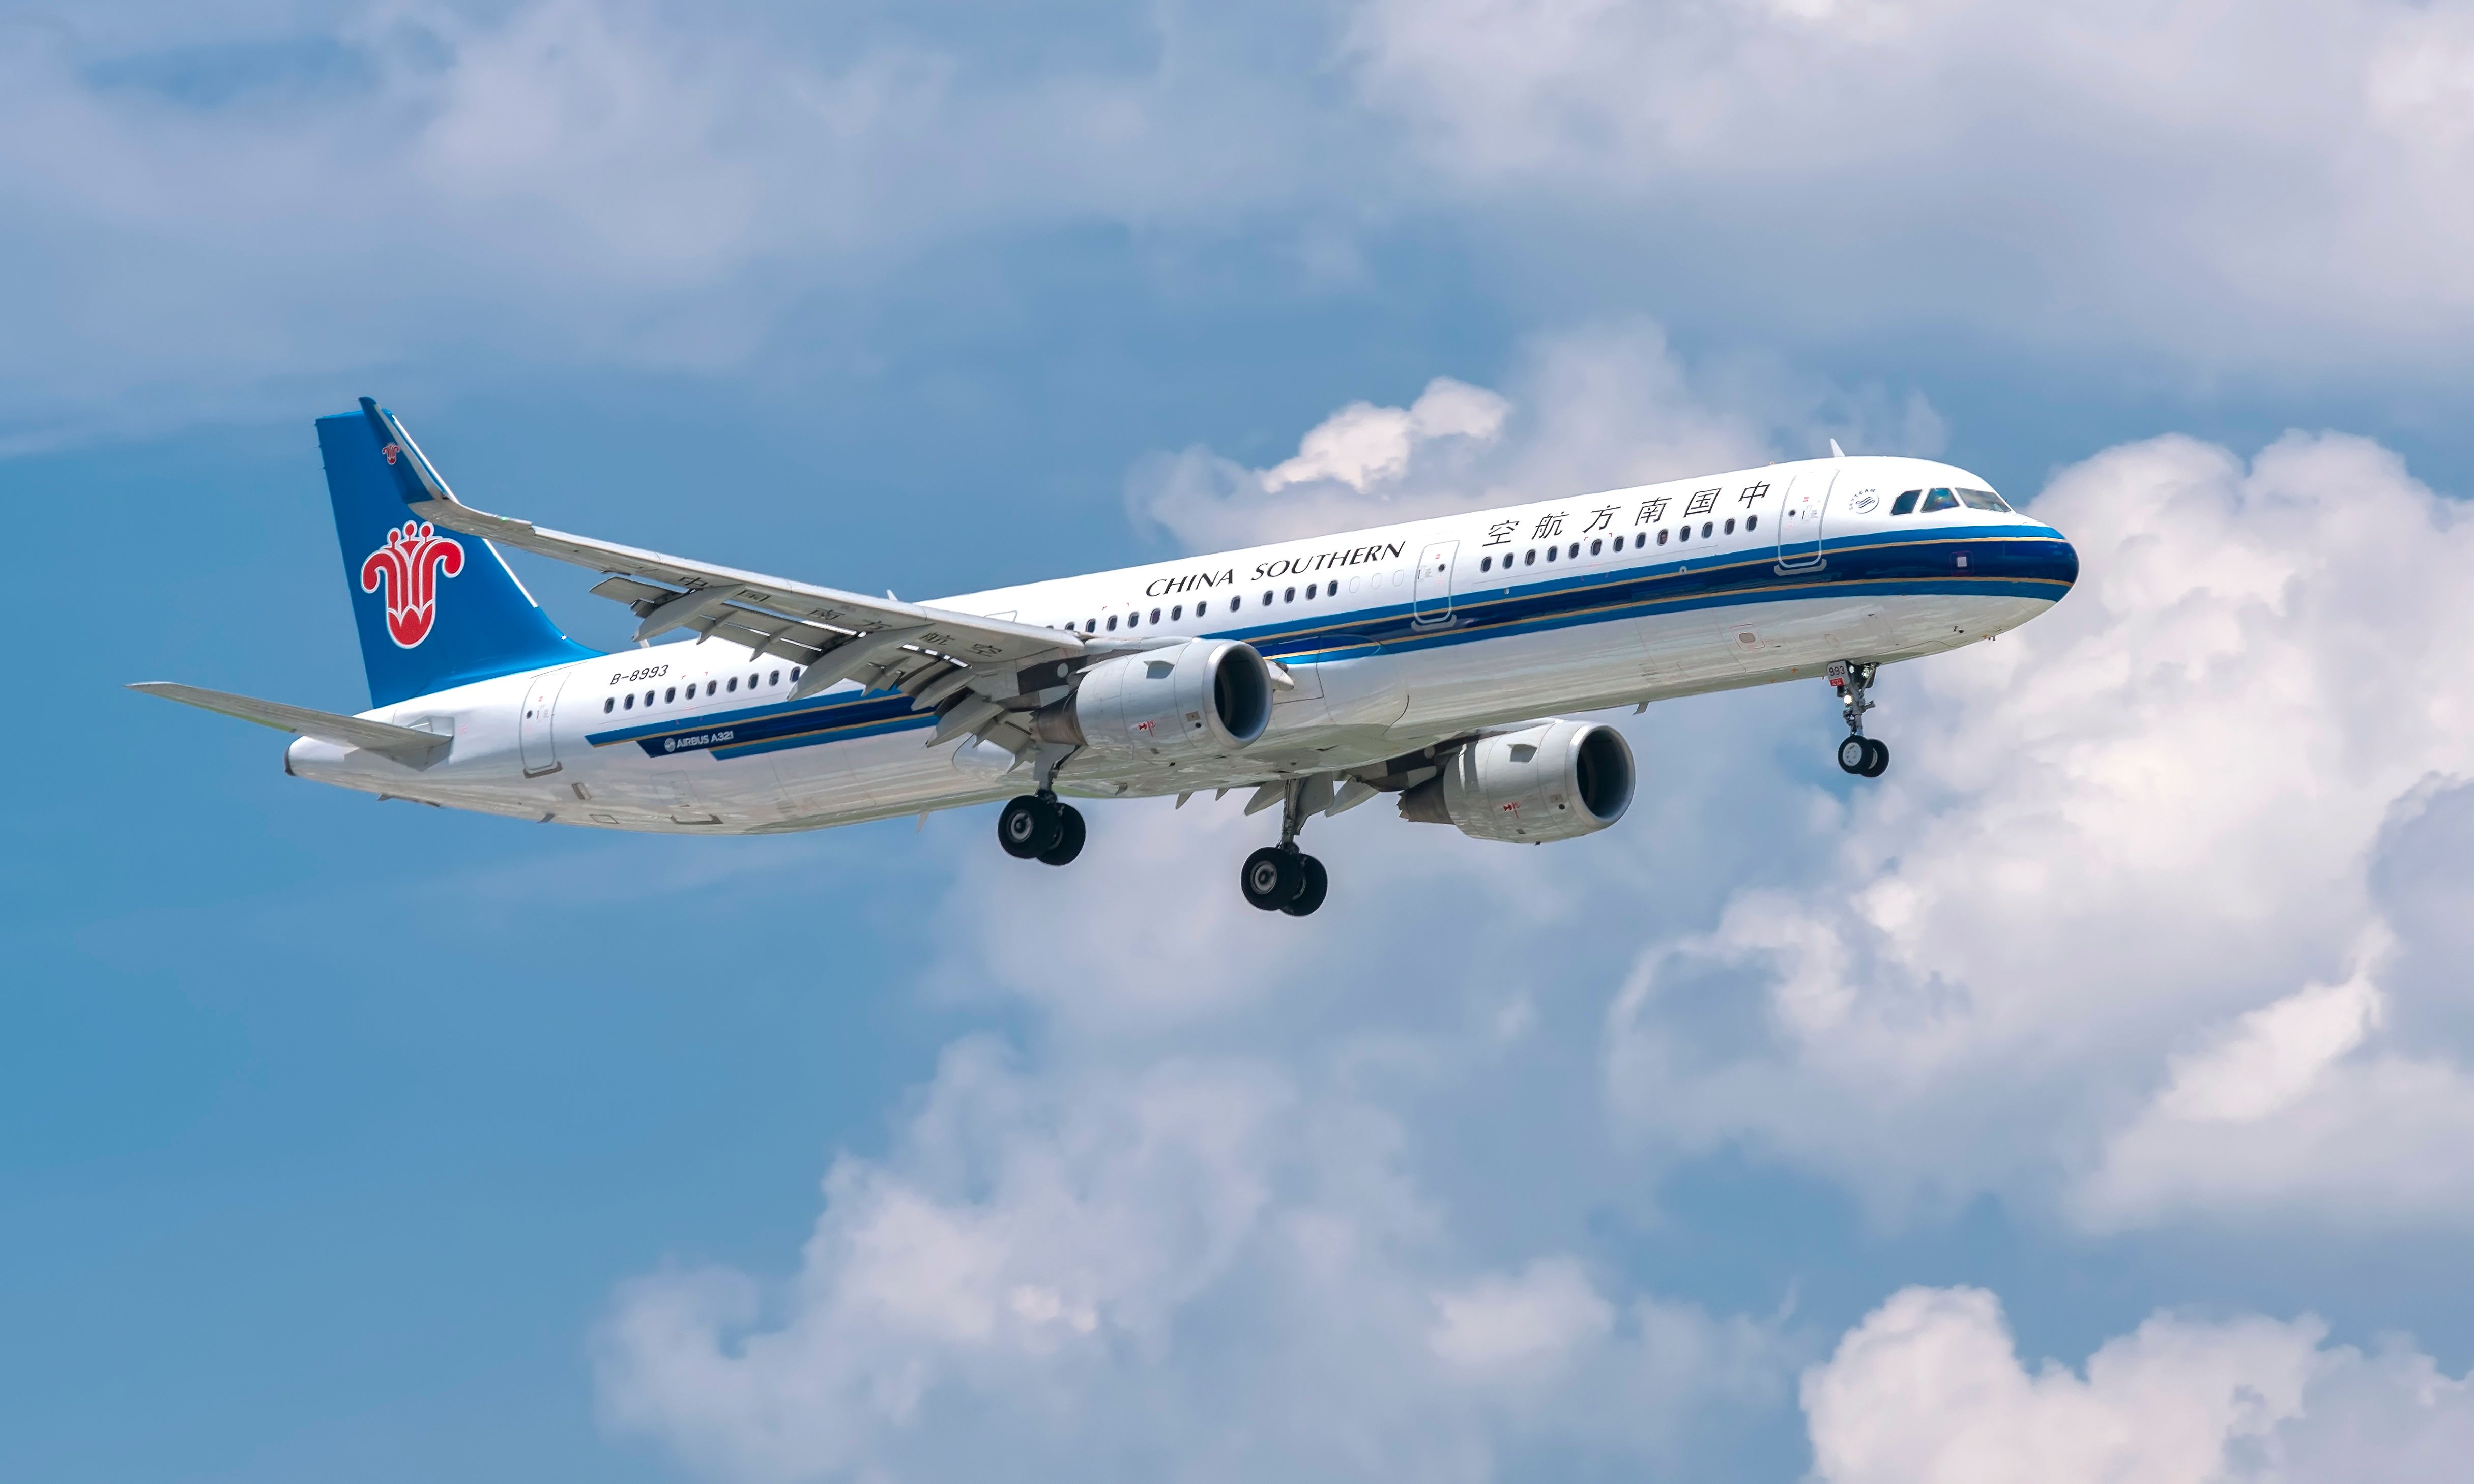 shutterstock_1415429741 - Ho Chi Minh City, Vietnam - June 1st, 2019: Aircraft airbus A321 of China Southern Airlines flying through clouds sky prepare landing at Tan Son Nhat International Airport, Ho Chi Minh City, Vietnam